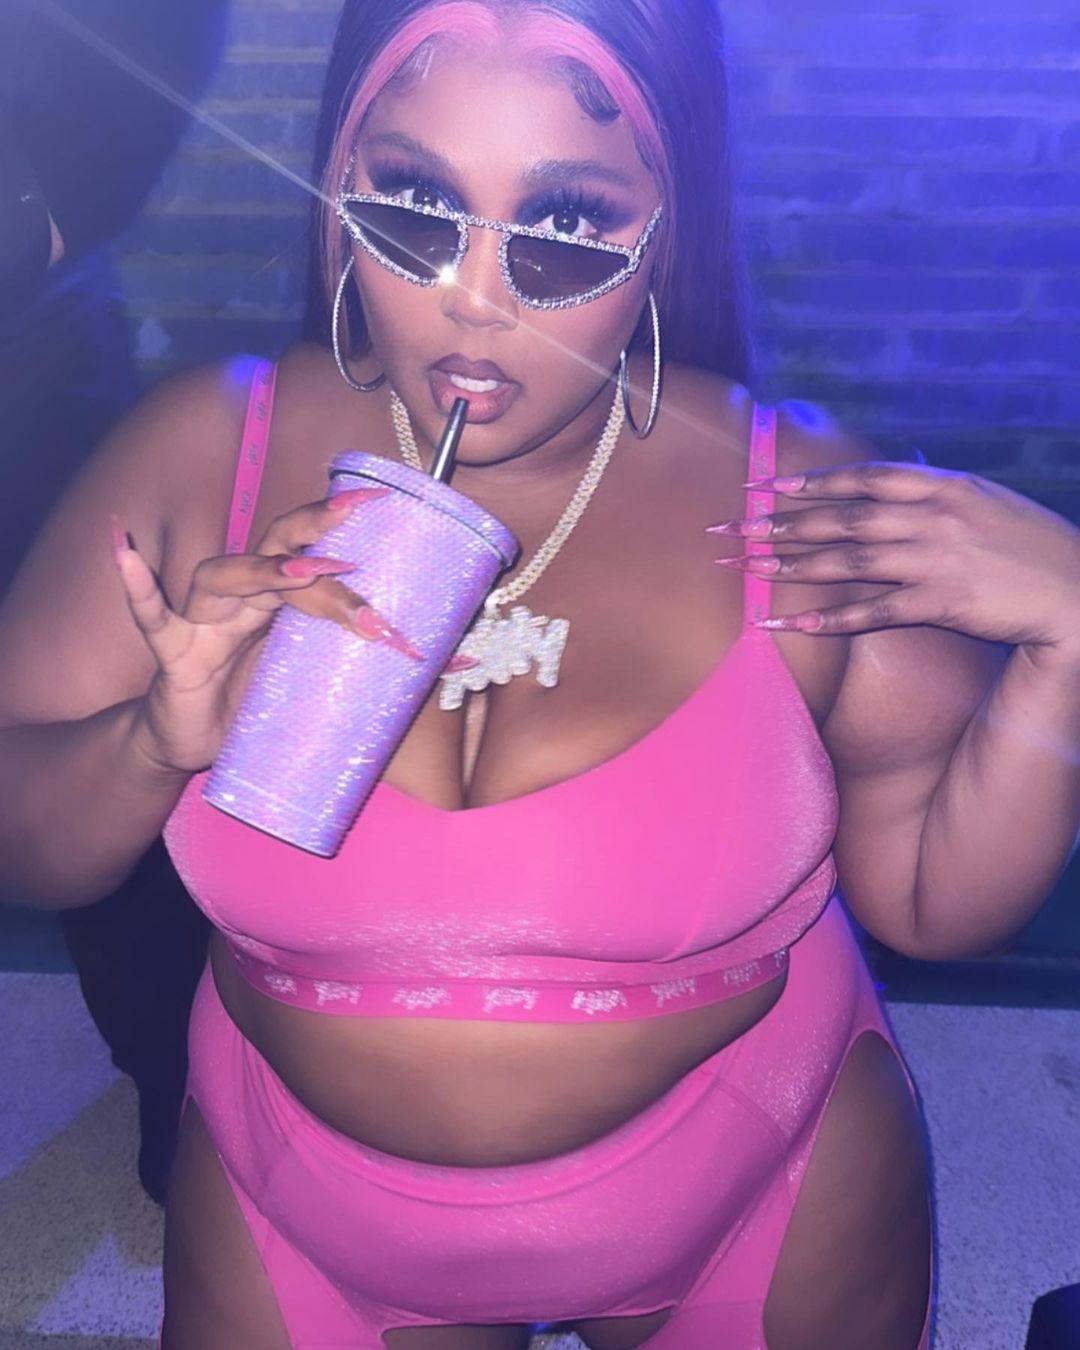 Lizzo Gets Freaky At 21 Savage Bday Party, Joins Other Celebs At The 'Freaknik'